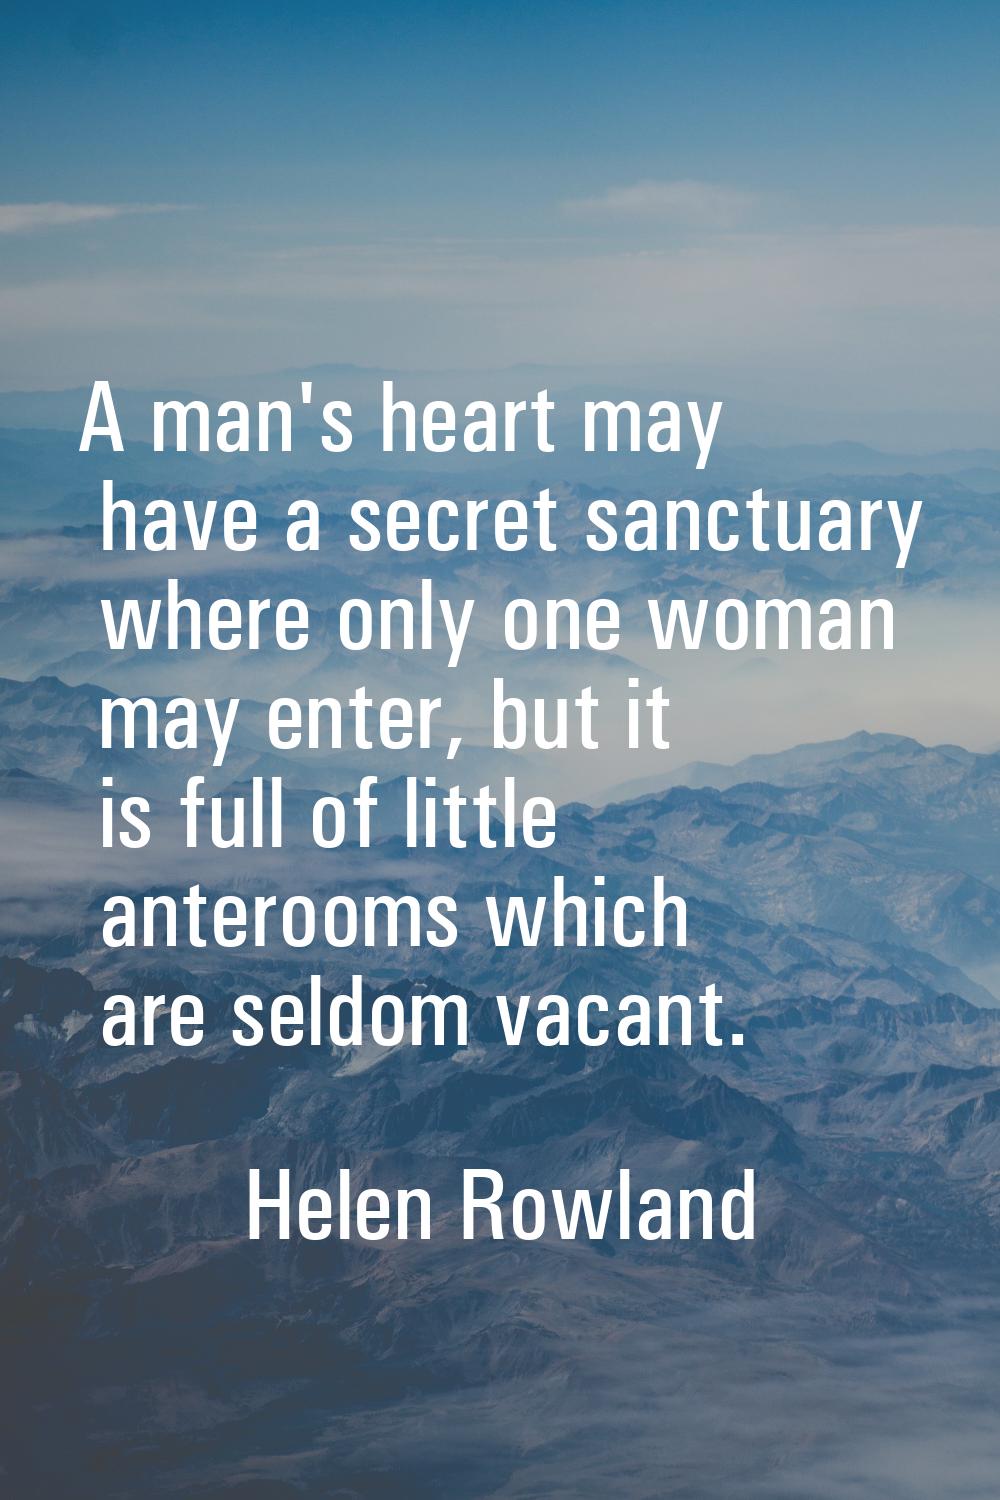 A man's heart may have a secret sanctuary where only one woman may enter, but it is full of little 